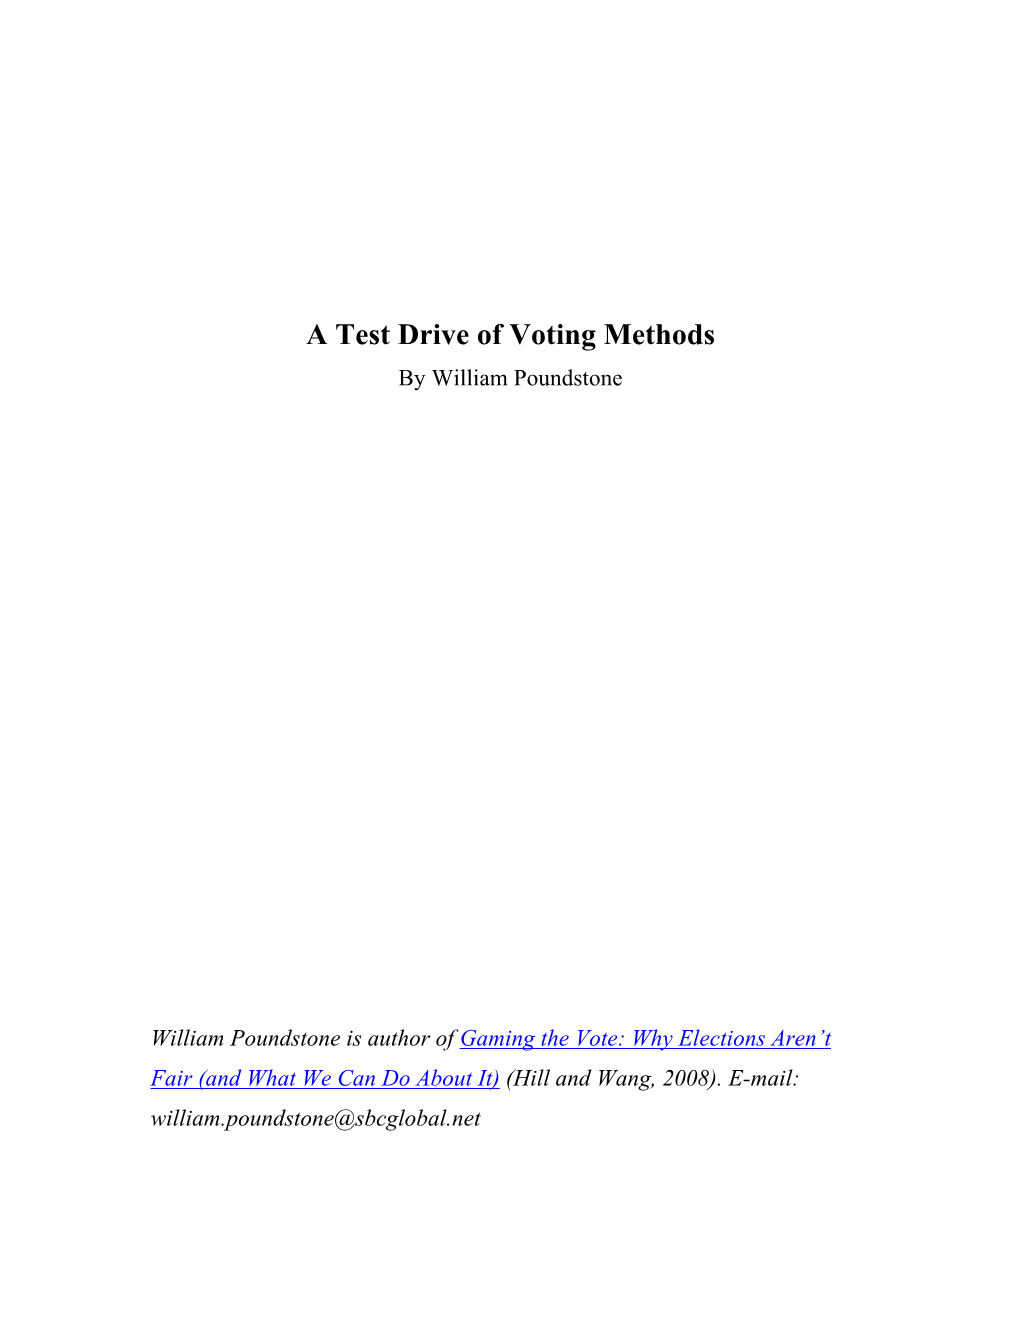 A Test Drive of Voting Methods by William Poundstone